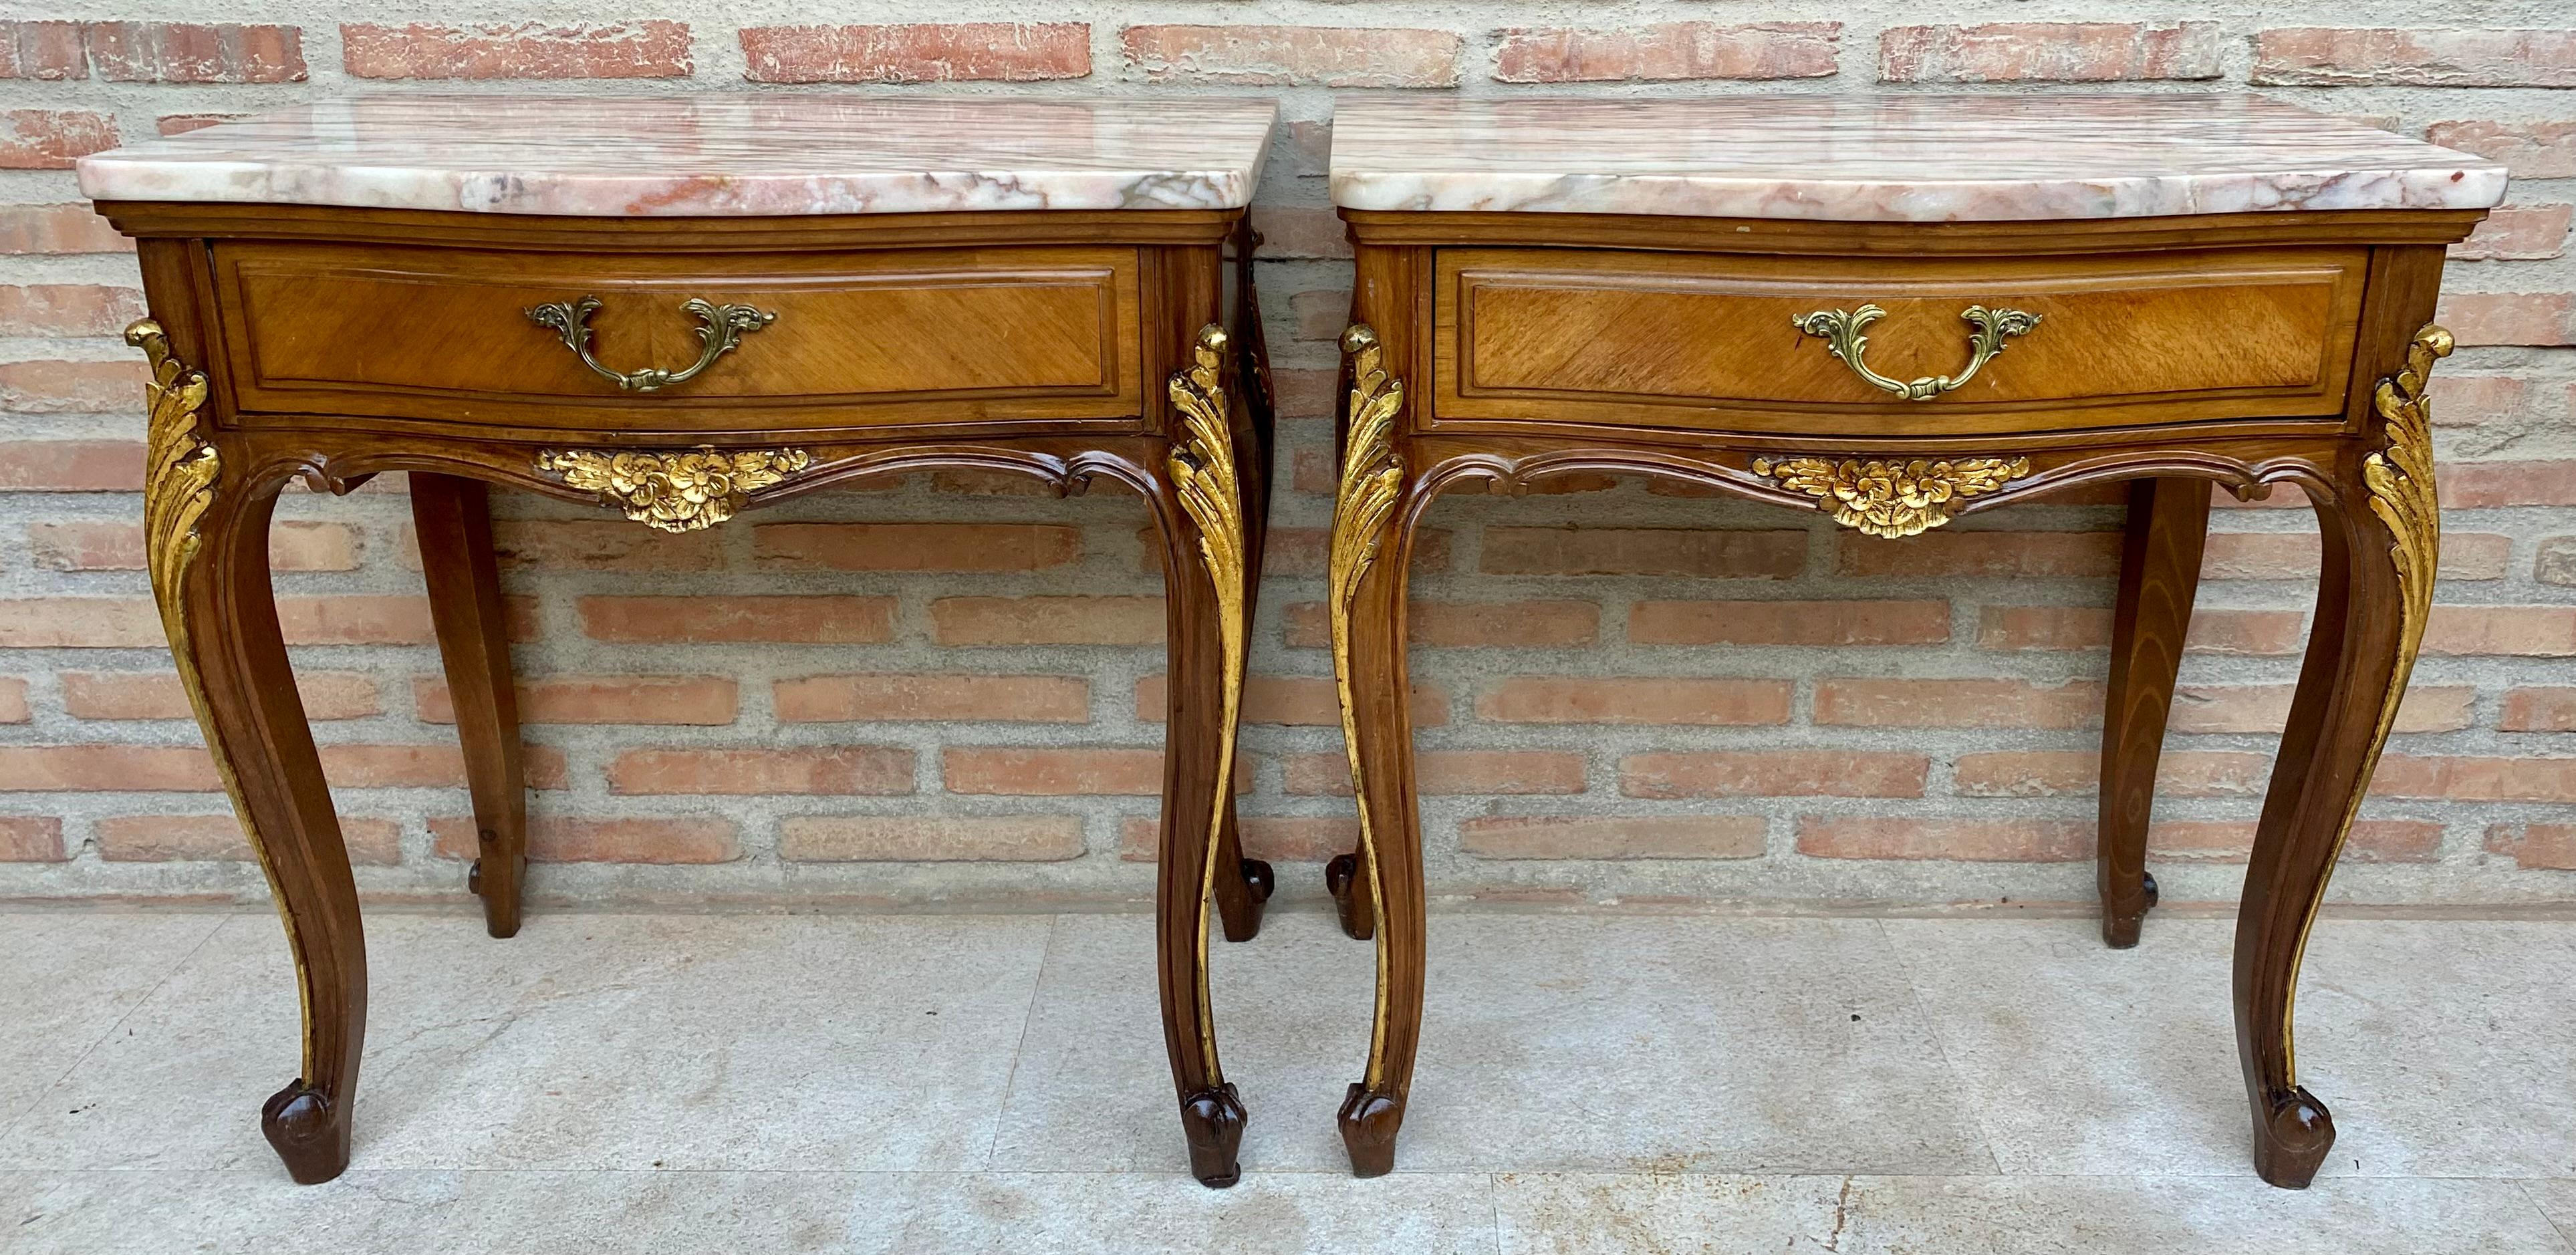 Pair of early 20th century French bedside tables with beautiful marble top, a drawer with a bronze handle and cabriole legs. The tables have a beautiful carving on the legs and skirt on the front with very beautiful golden skates.